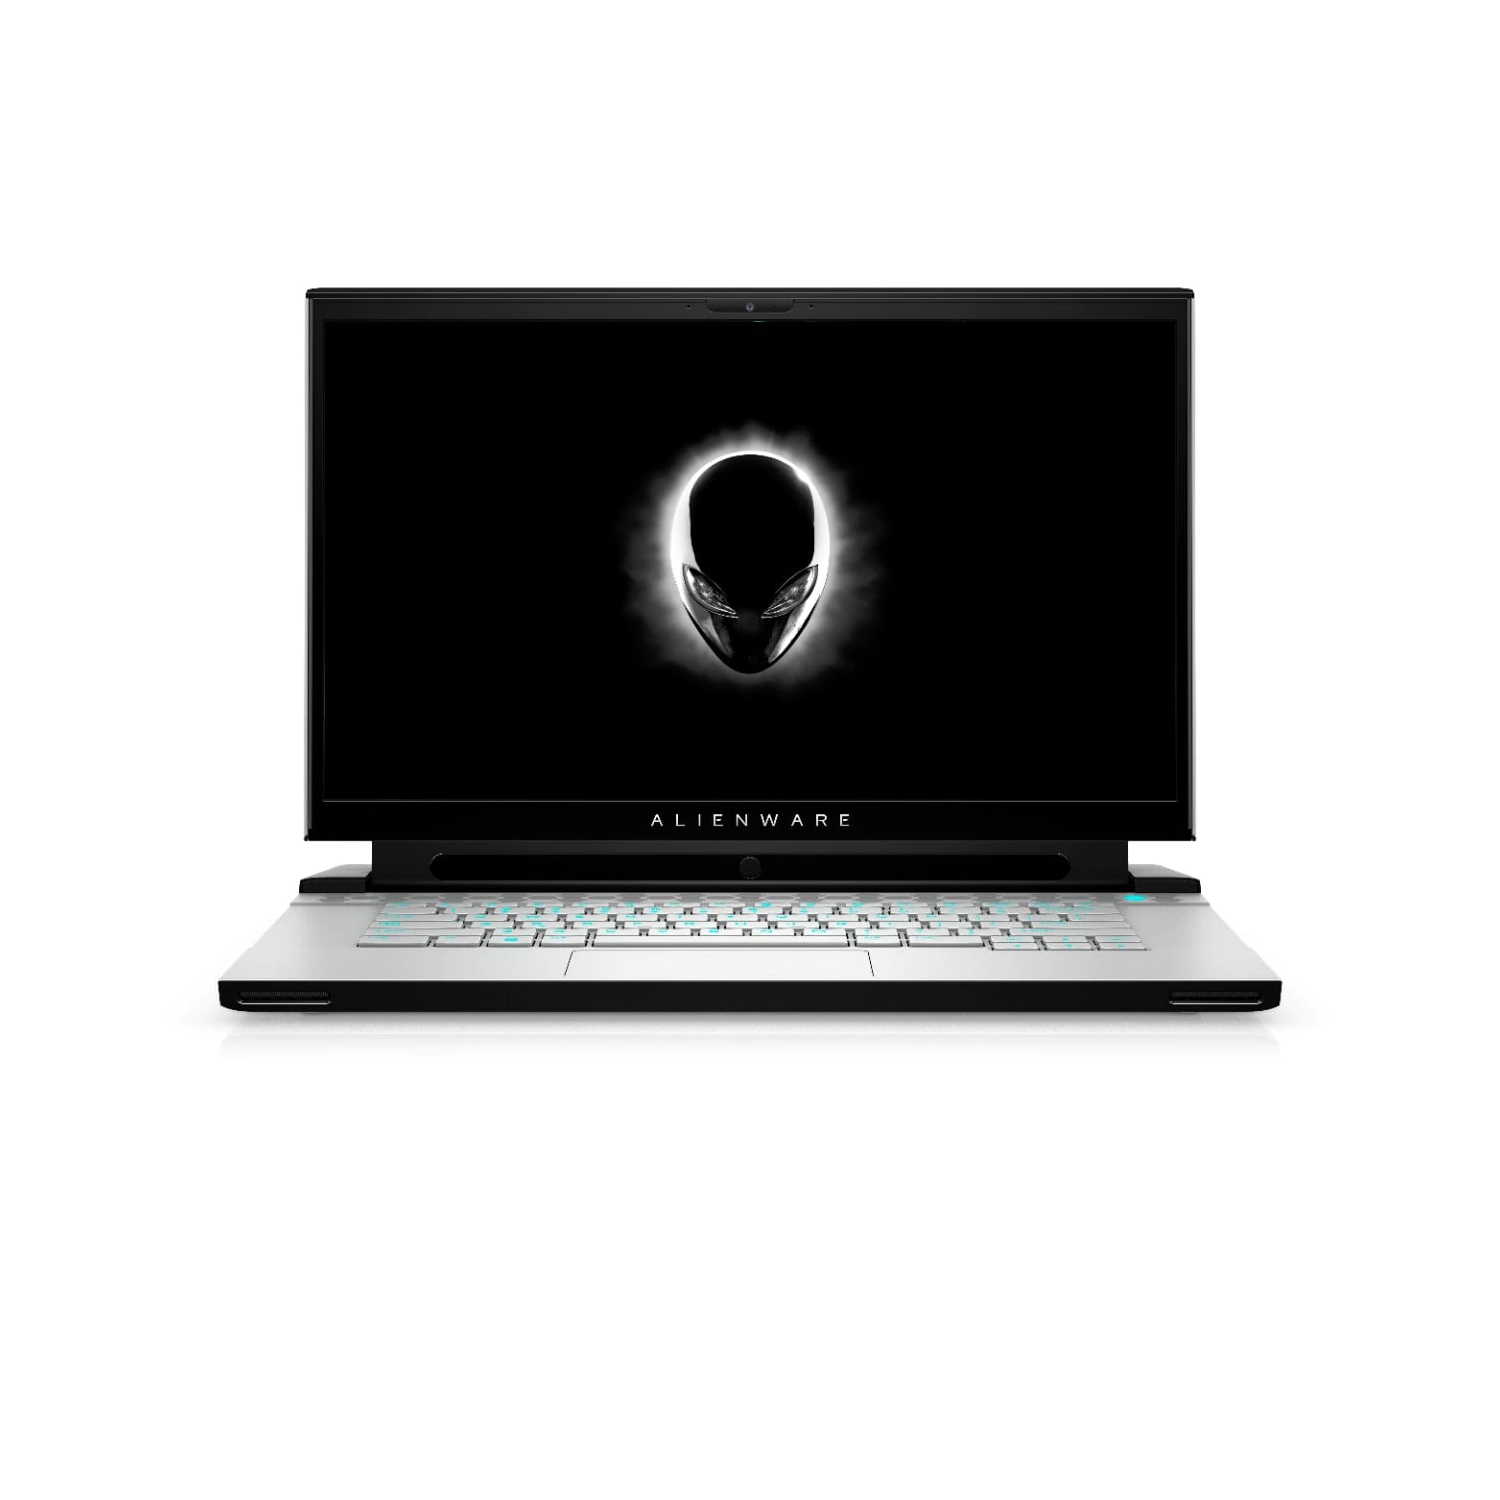 Refurbished (Excellent) - Dell Alienware m15 R3 Gaming Laptop (2020), 15.6" FHD, Core i7 - 1TB SSD + 512GB SSD - 32GB RAM - 2070 Super, 5.1 GHz - 10th Gen CPU Certified